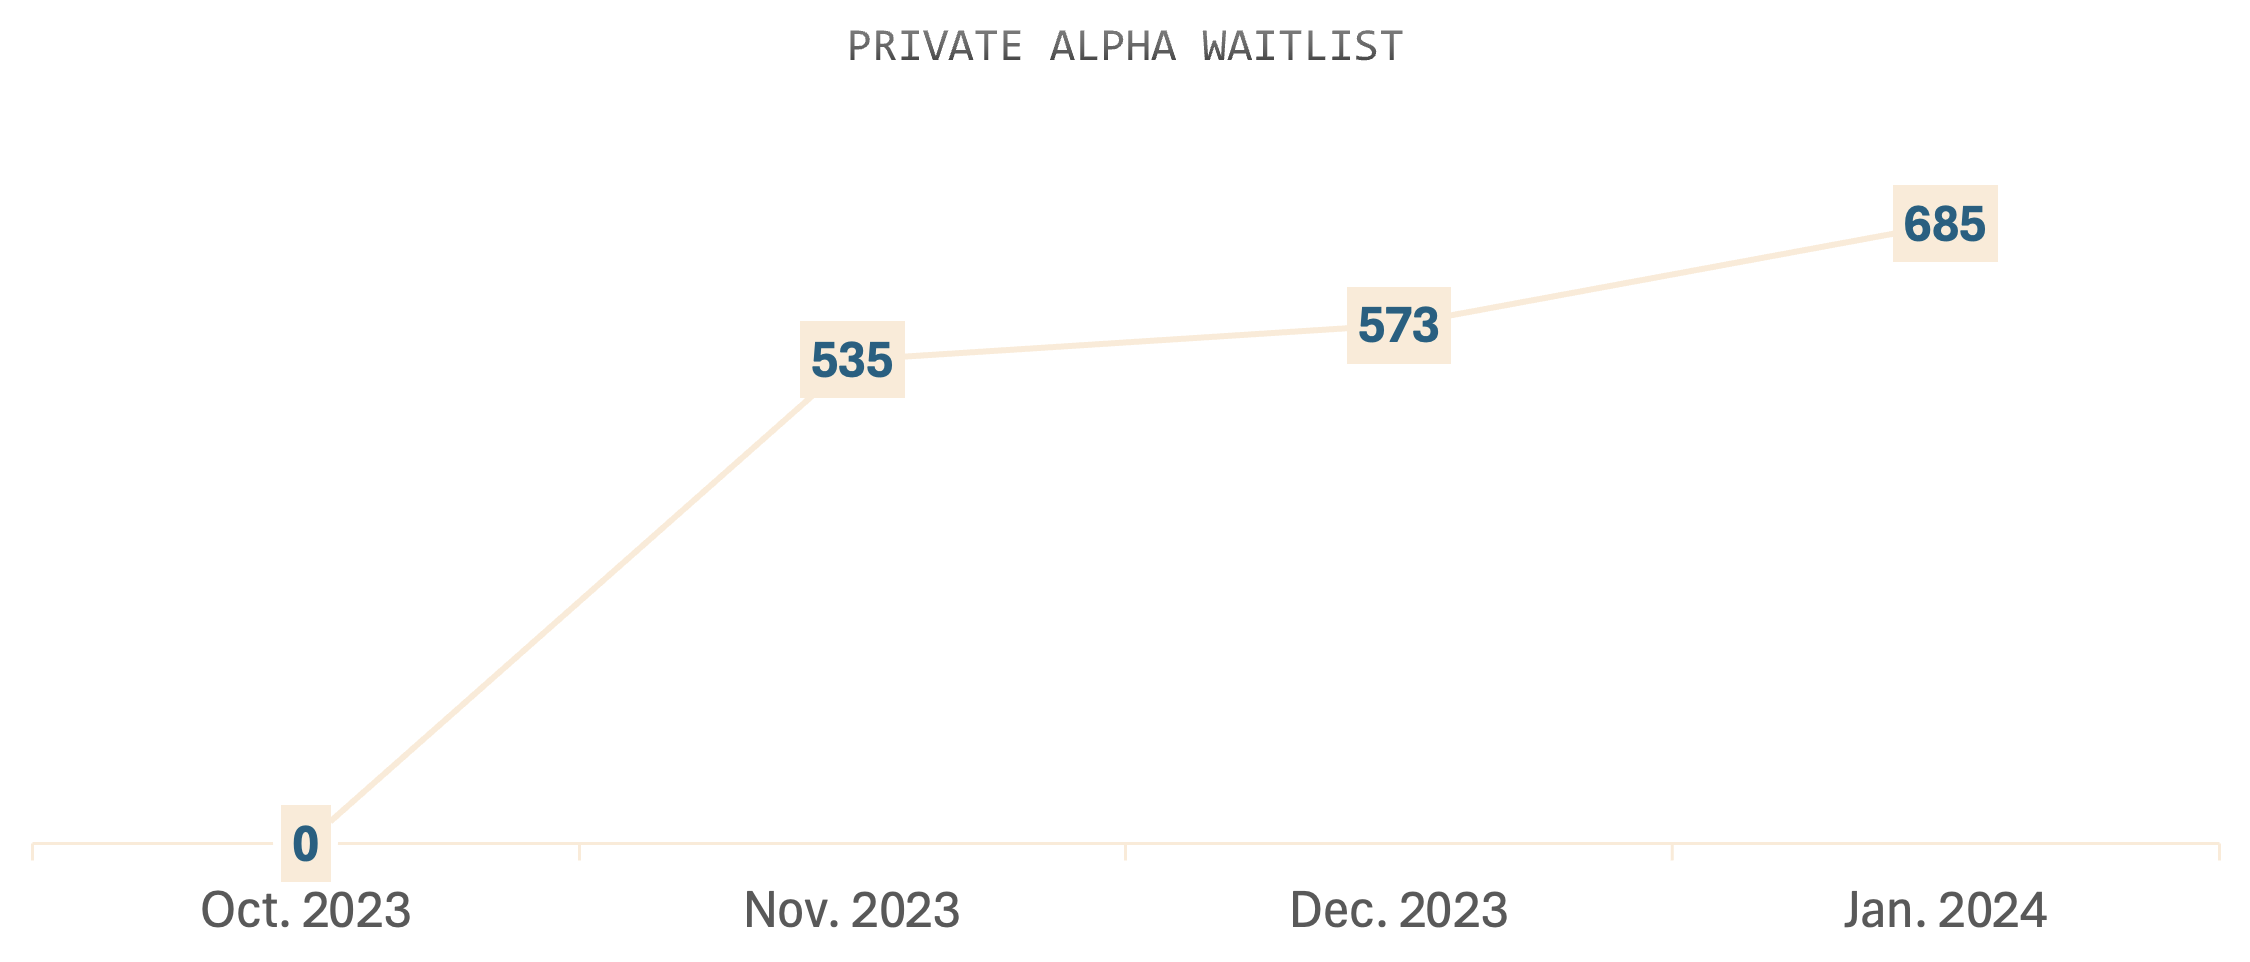 Waitlist size graph over the months